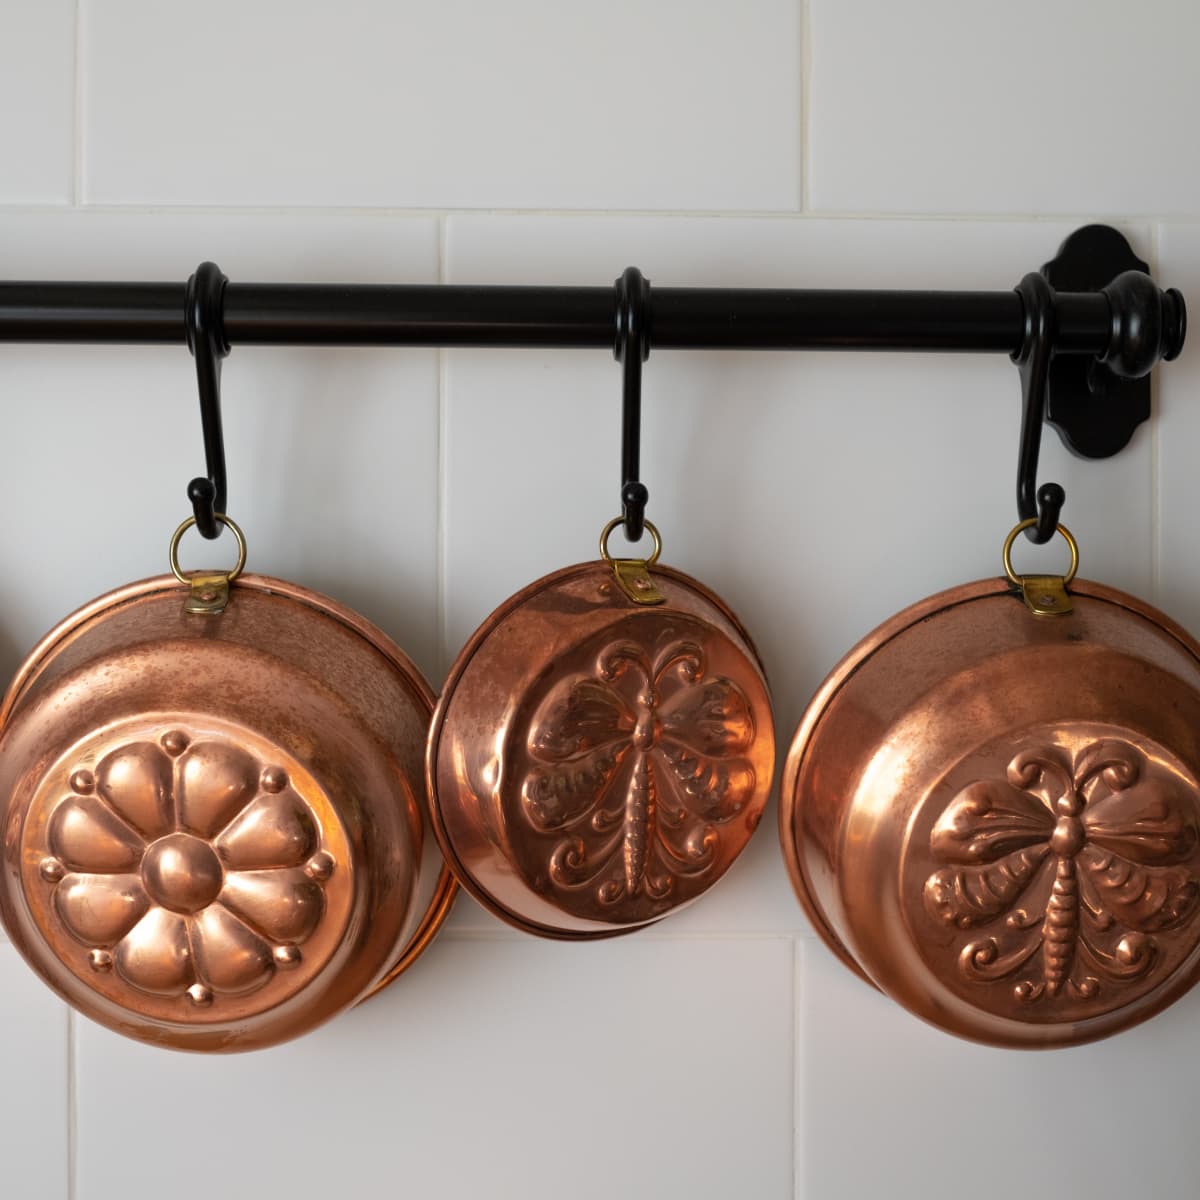 How to EASILY Restore Brass Decor and Make it Shine